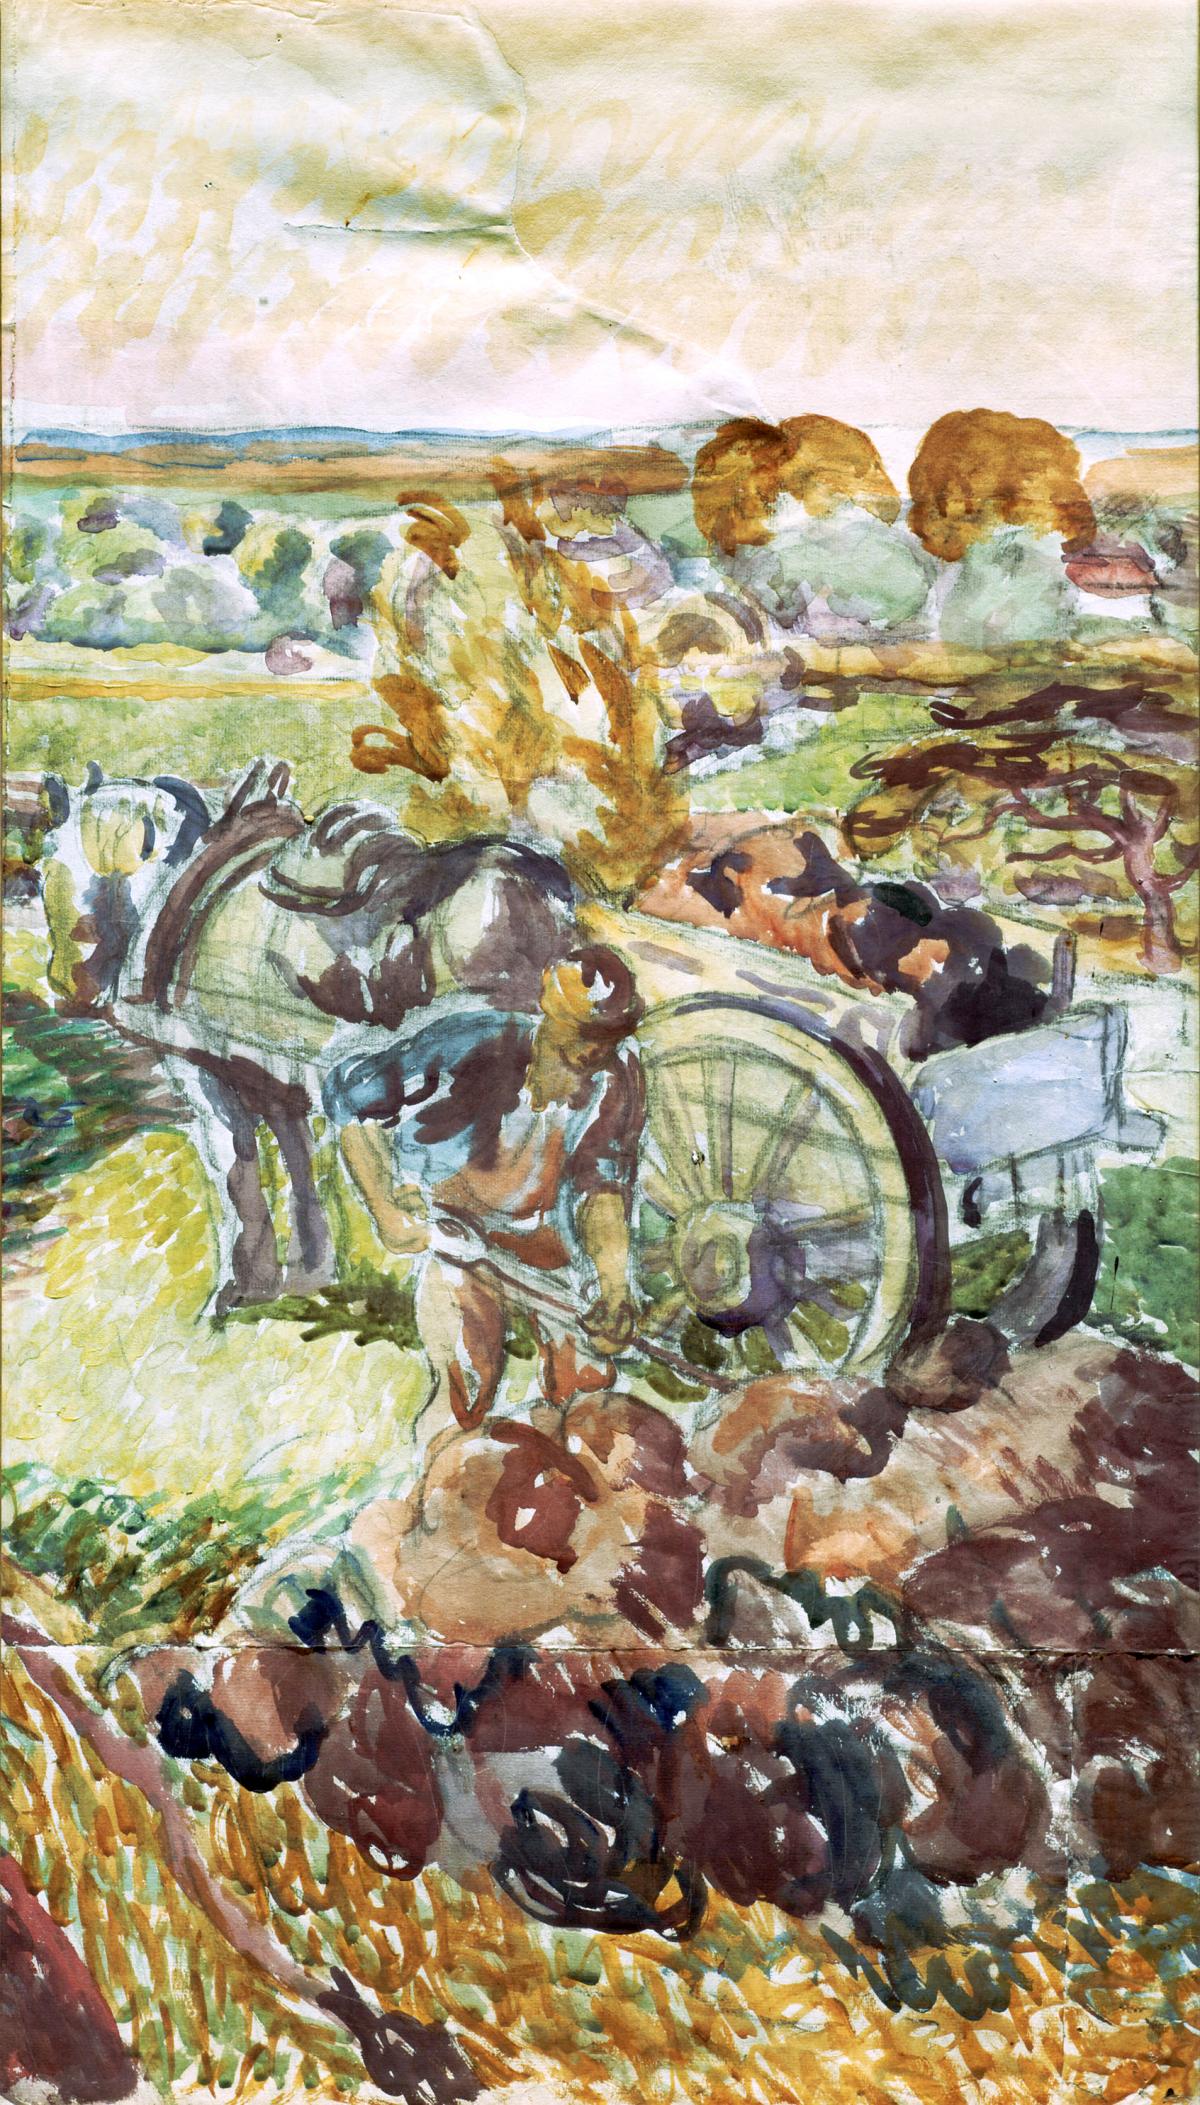 Swirling brushstrokes create a scene of a farmer shoveling soil, with a horse-drawn cart behind him, in the midst of rolling hills and farmland, done in greens and browns